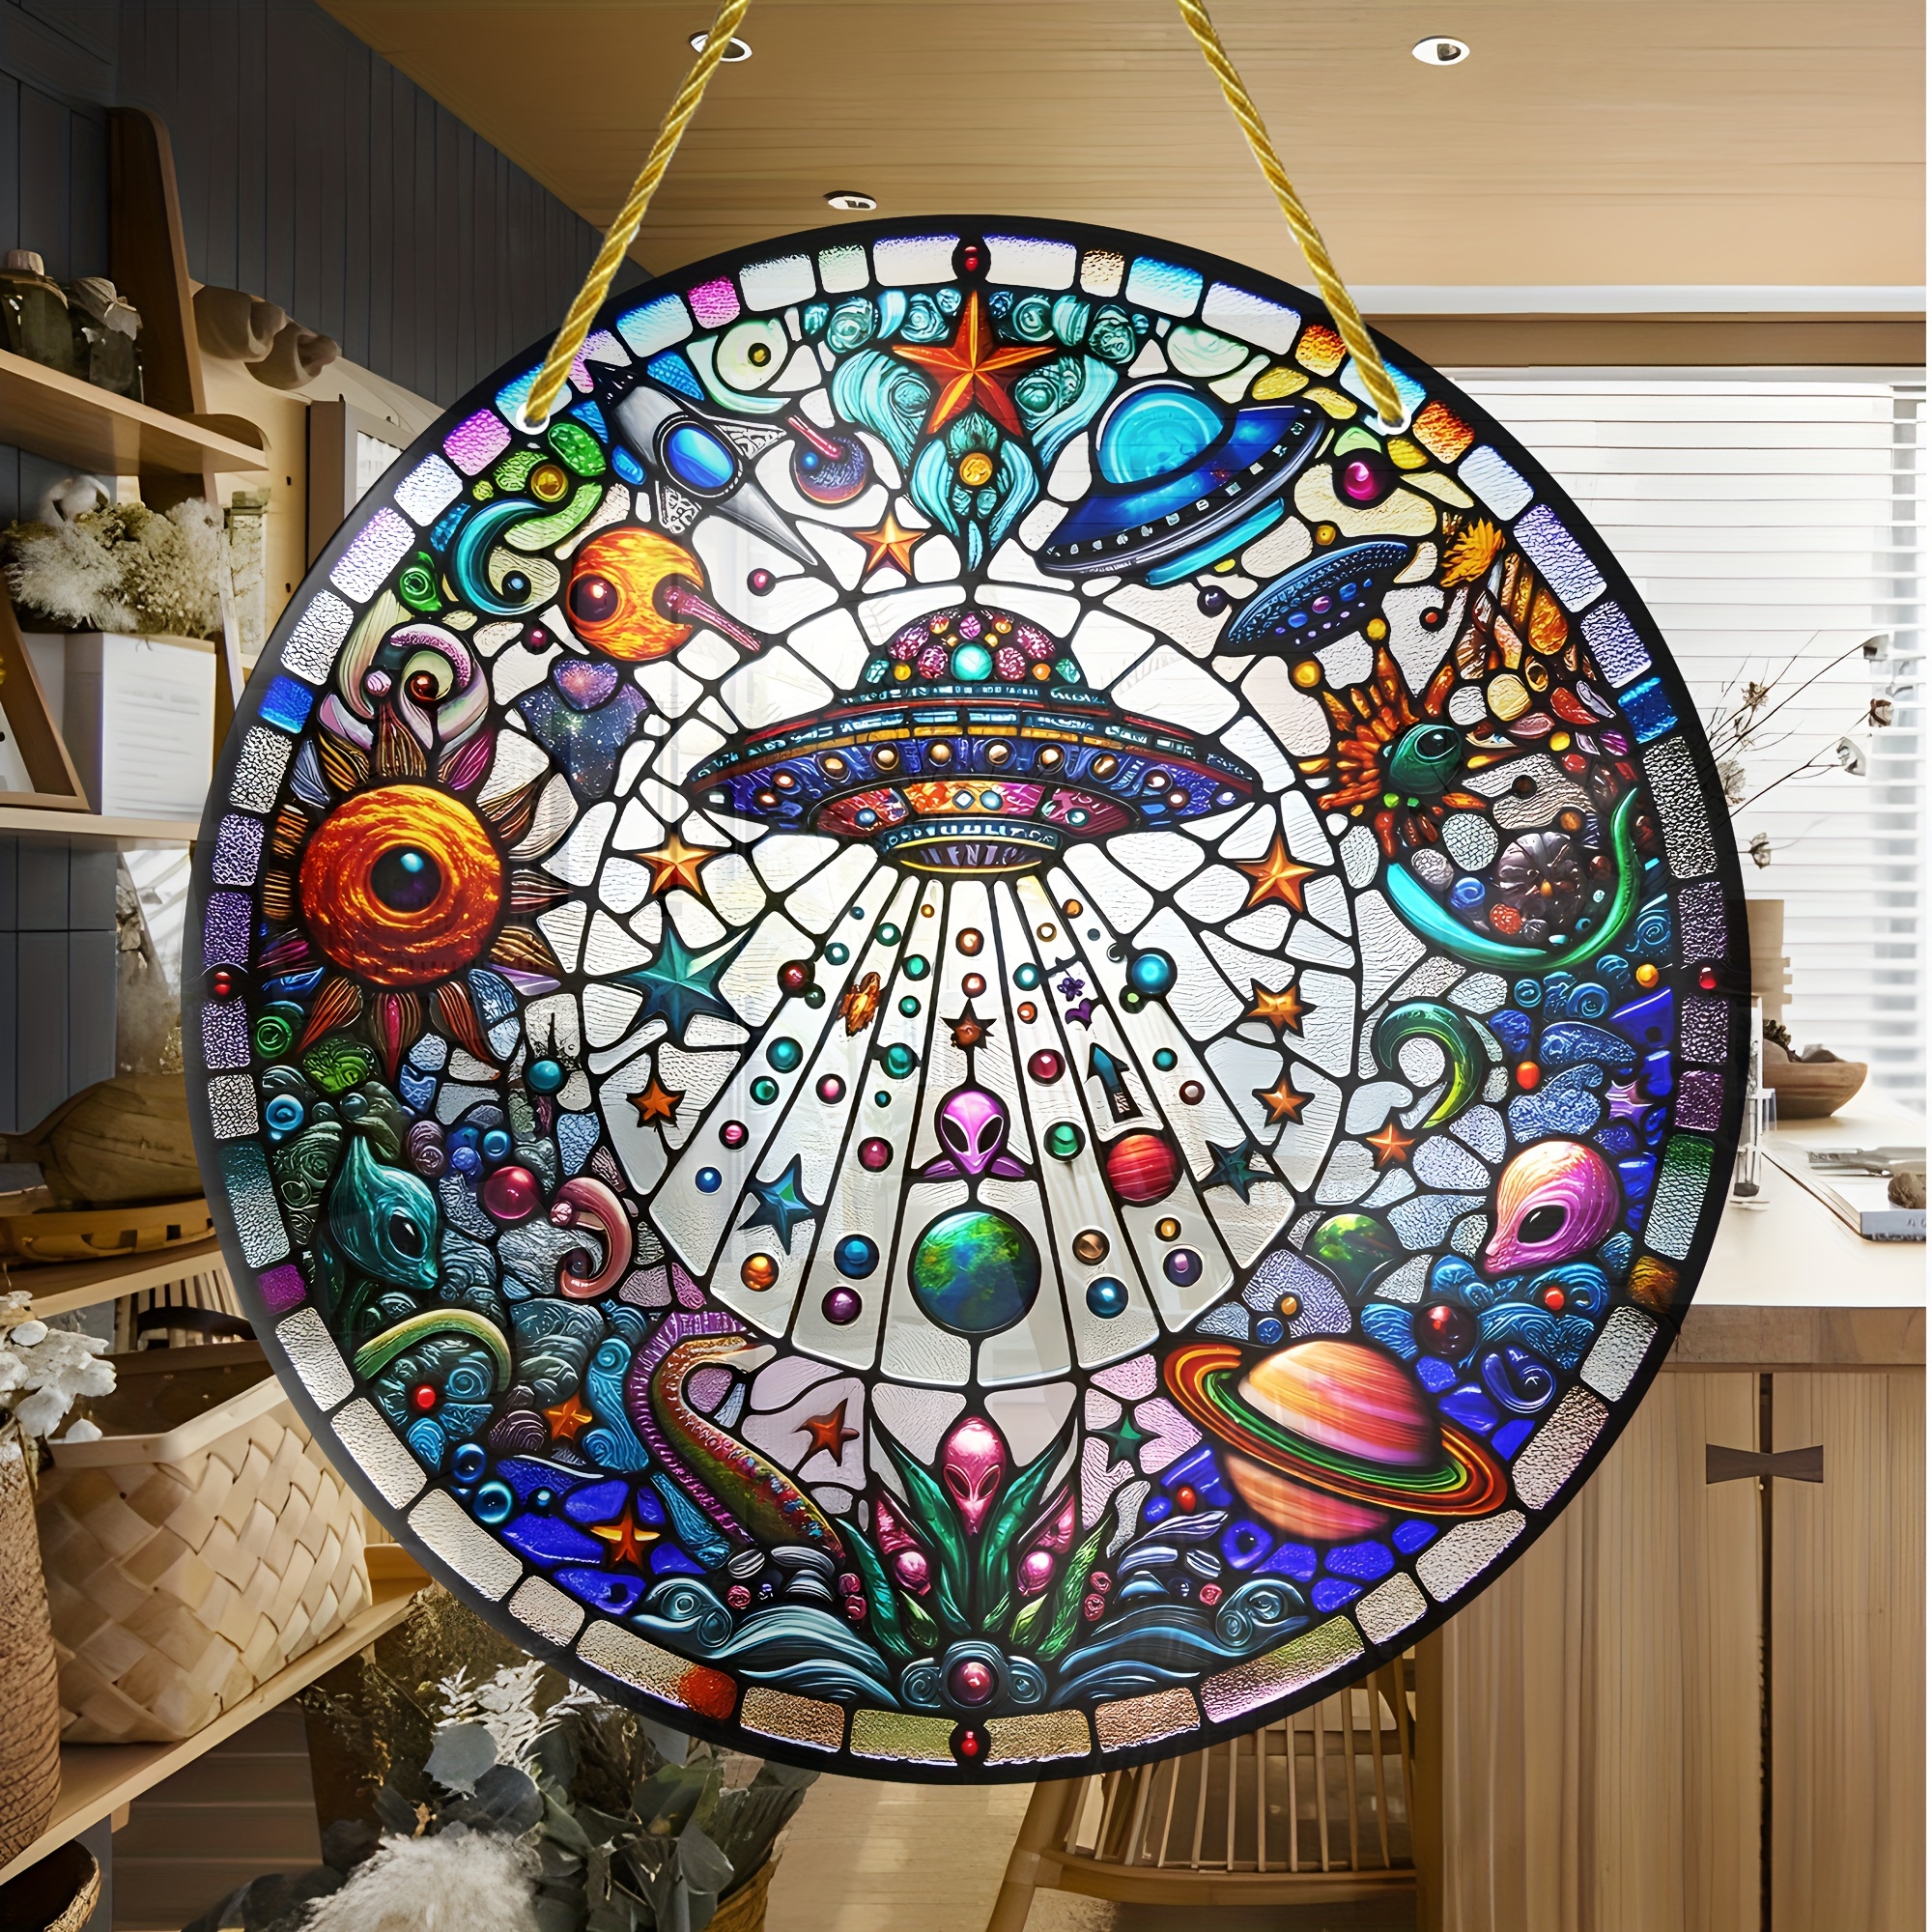 

Ufo & Alien Sun Catcher Wall Art - 8"x8" Indoor/outdoor Decor For Home, Office, Patio | Perfect For Bedroom, Porch, Garland | Unique Birthday Or Housewarming Gift